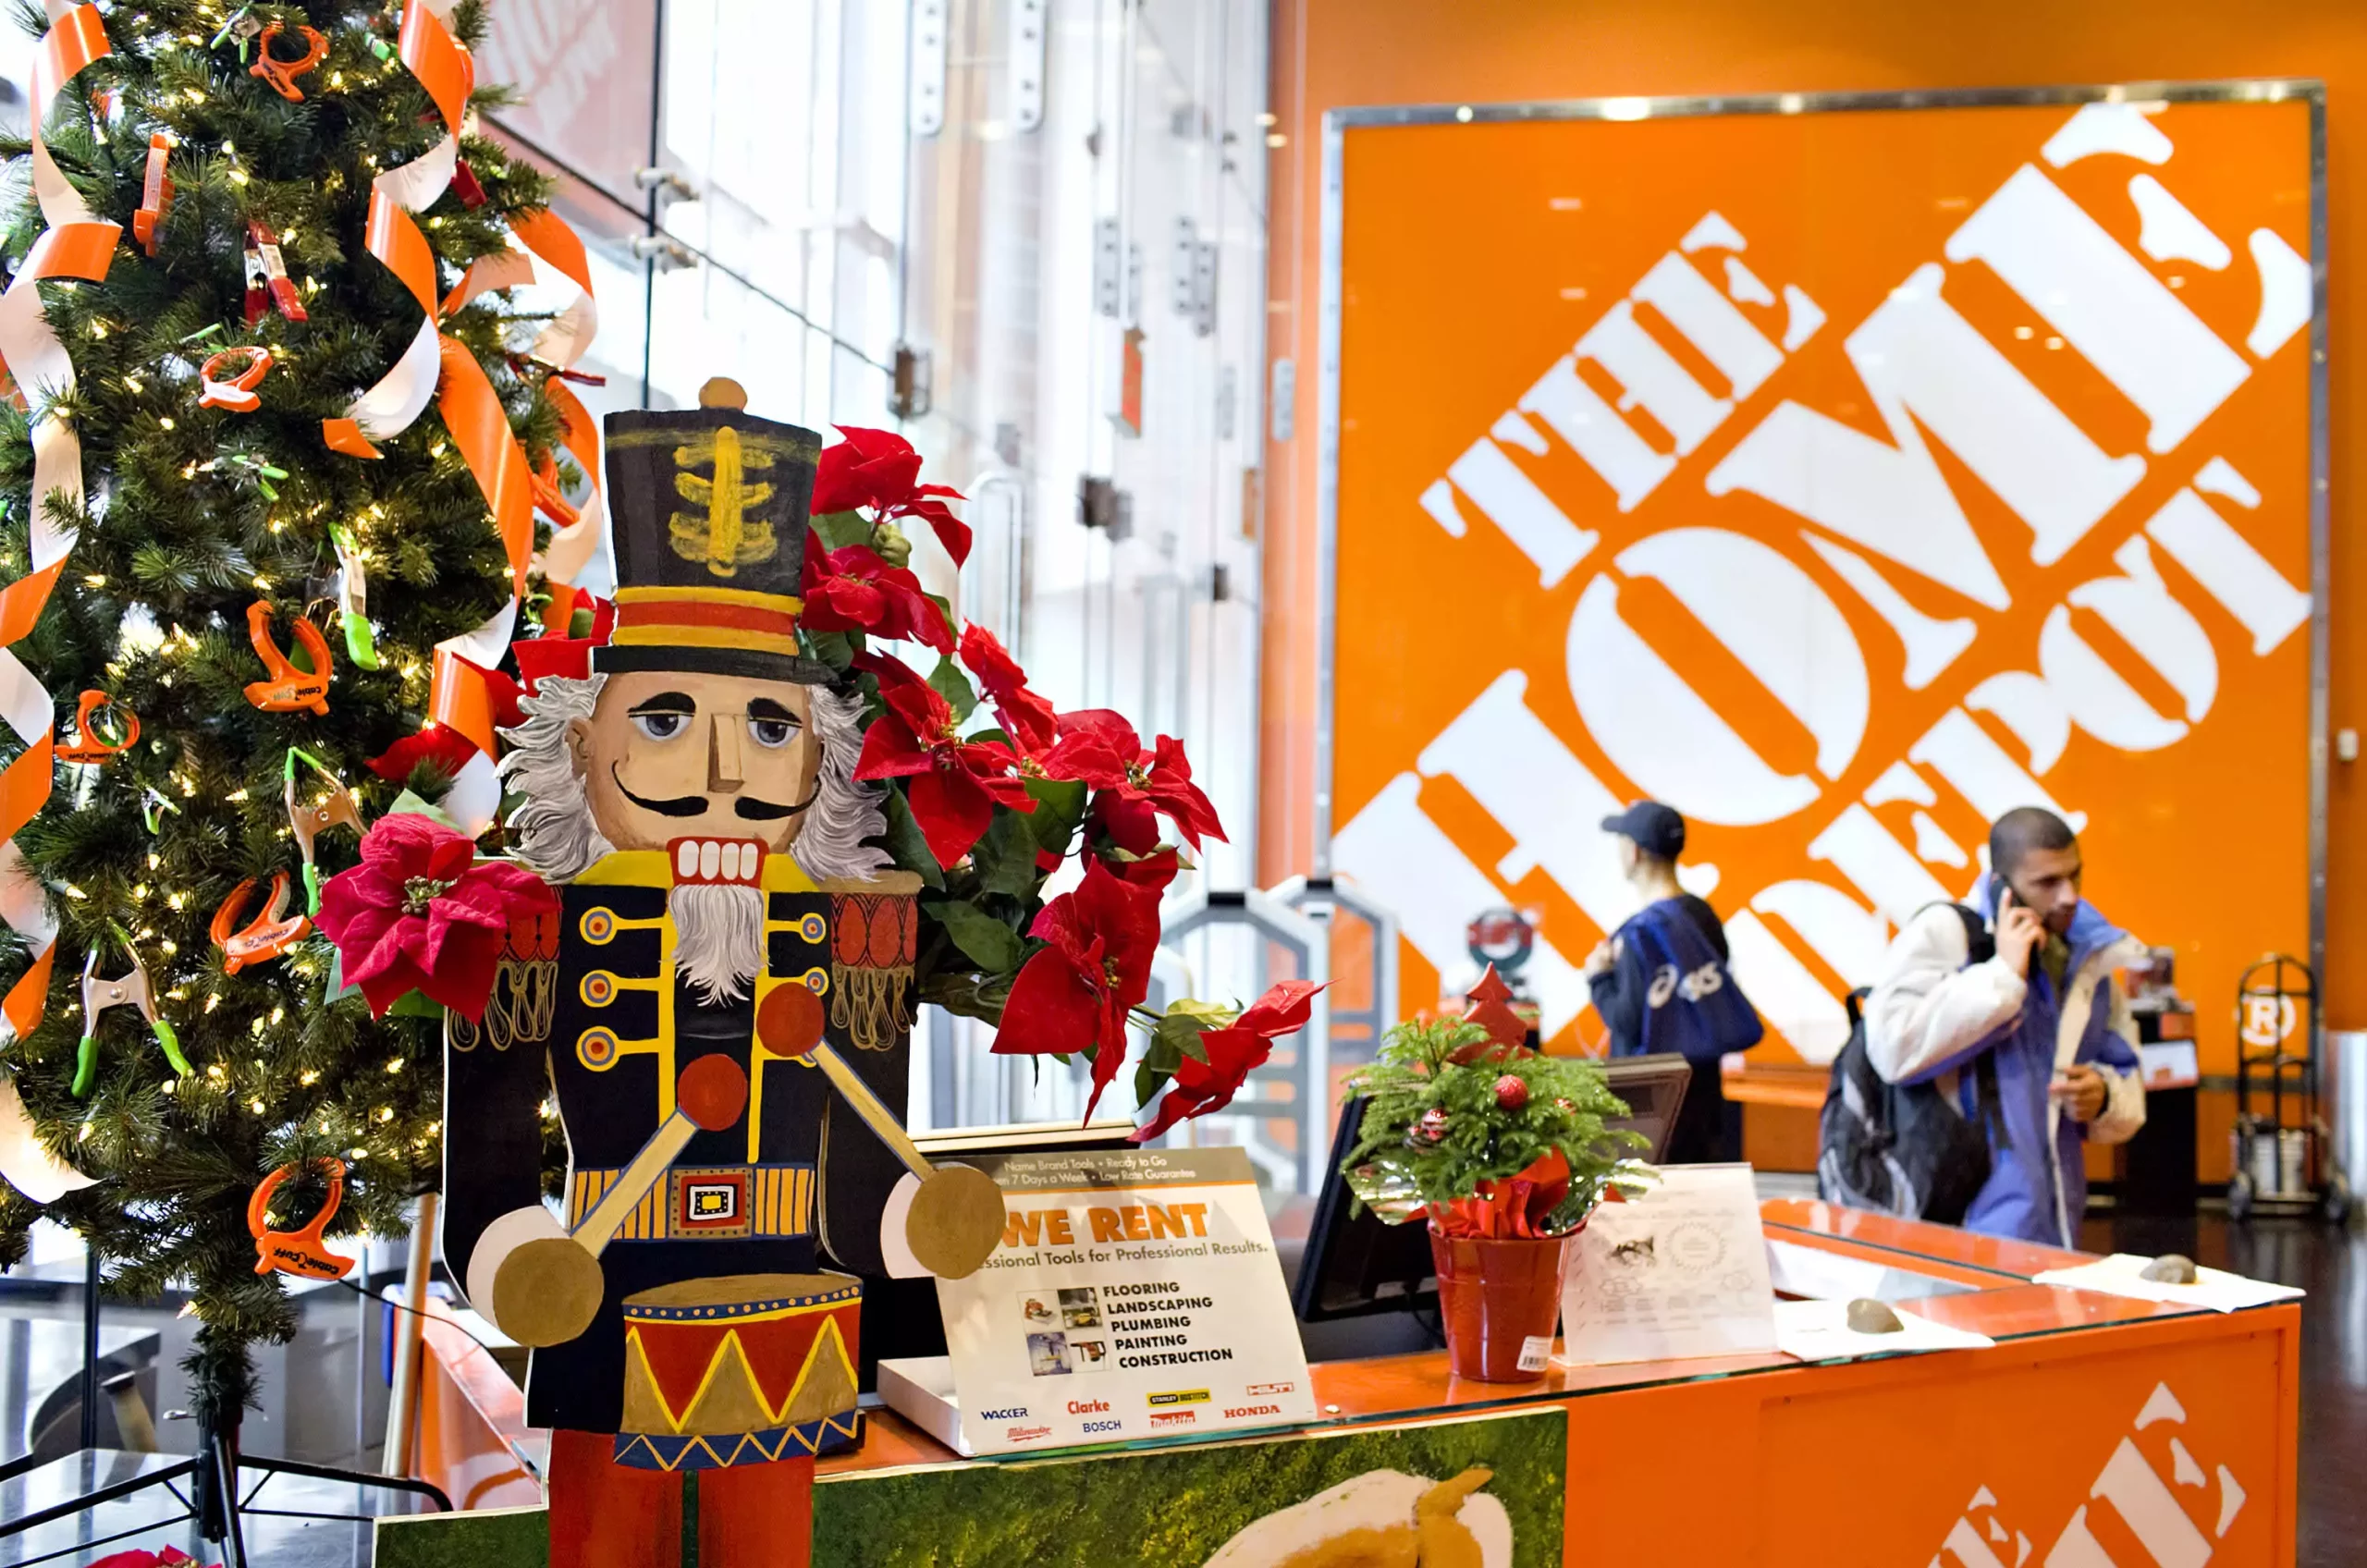 What holidays does Home Depot pay for?